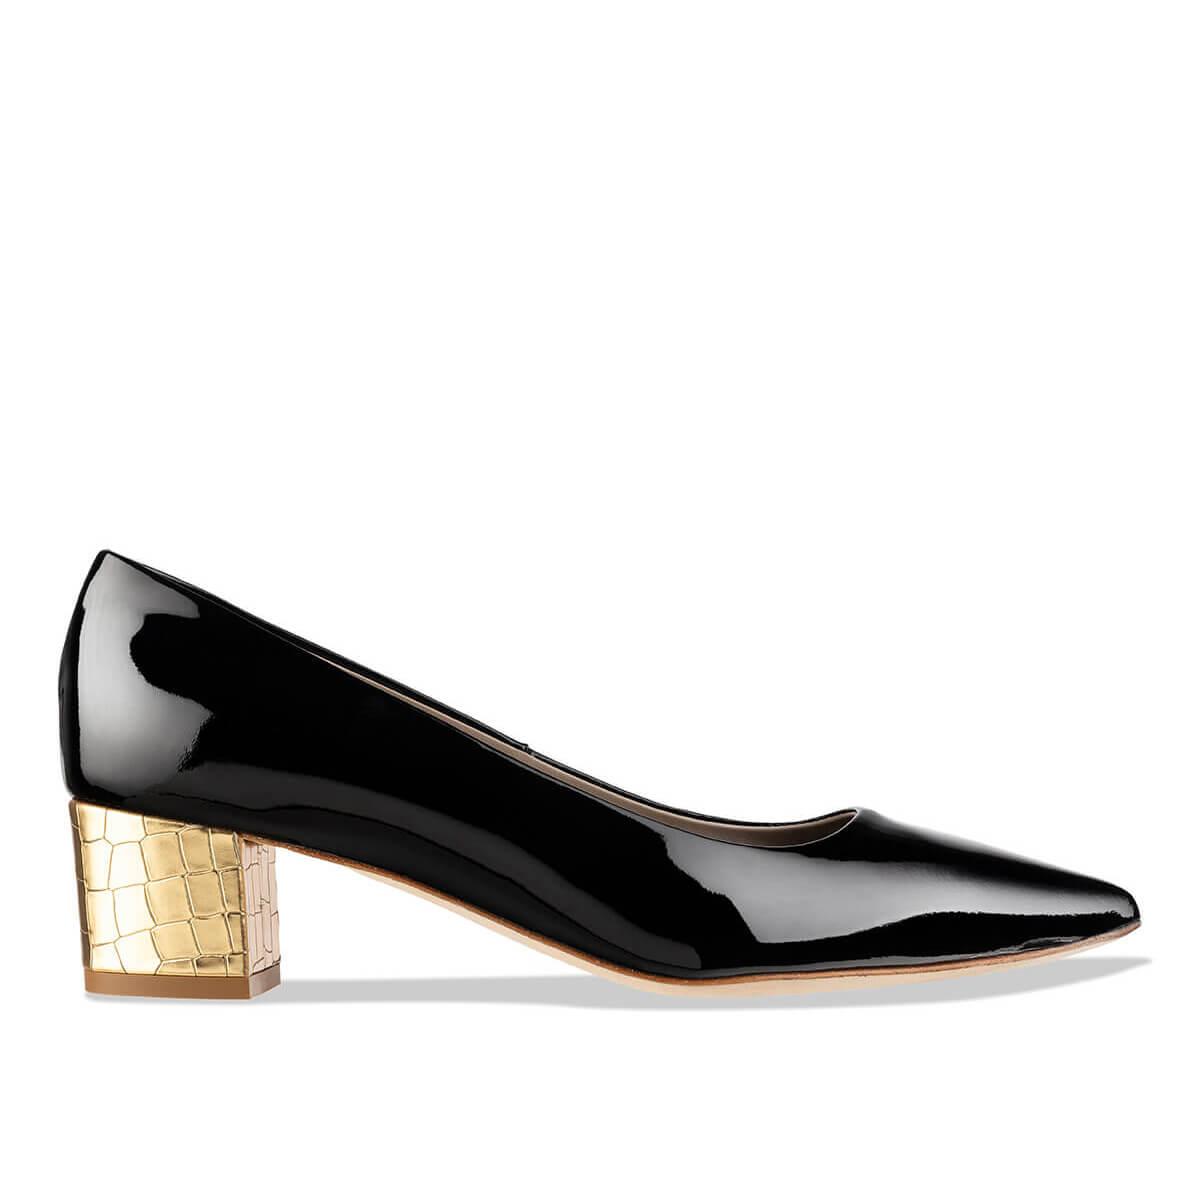 'Atkin' Women’s black and gold croc leather heels - Italian Shoes | habbot